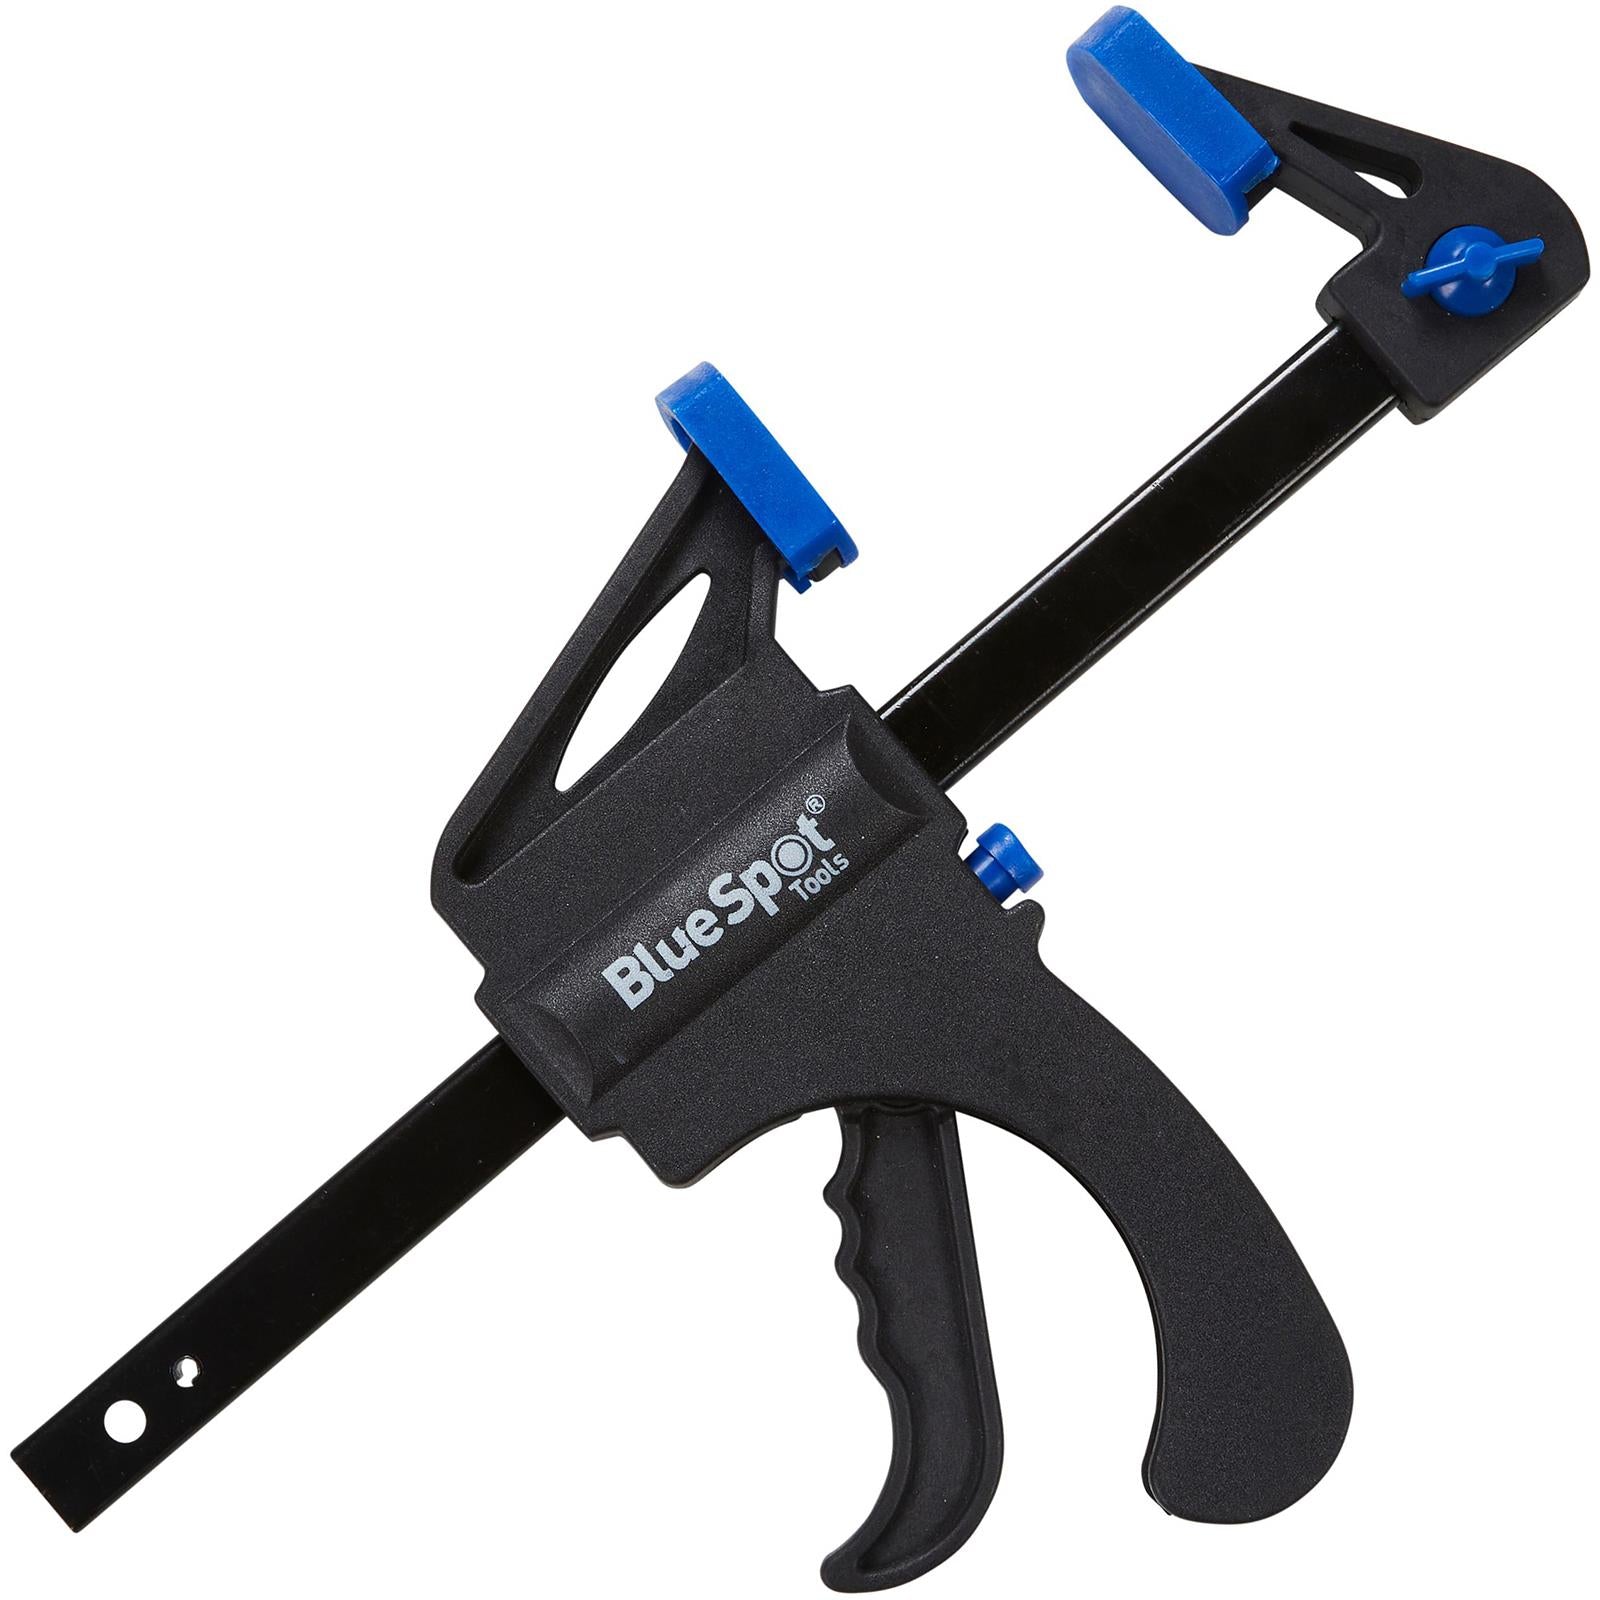 BlueSpot 6" Ratchet Speed Clamp and Spreader